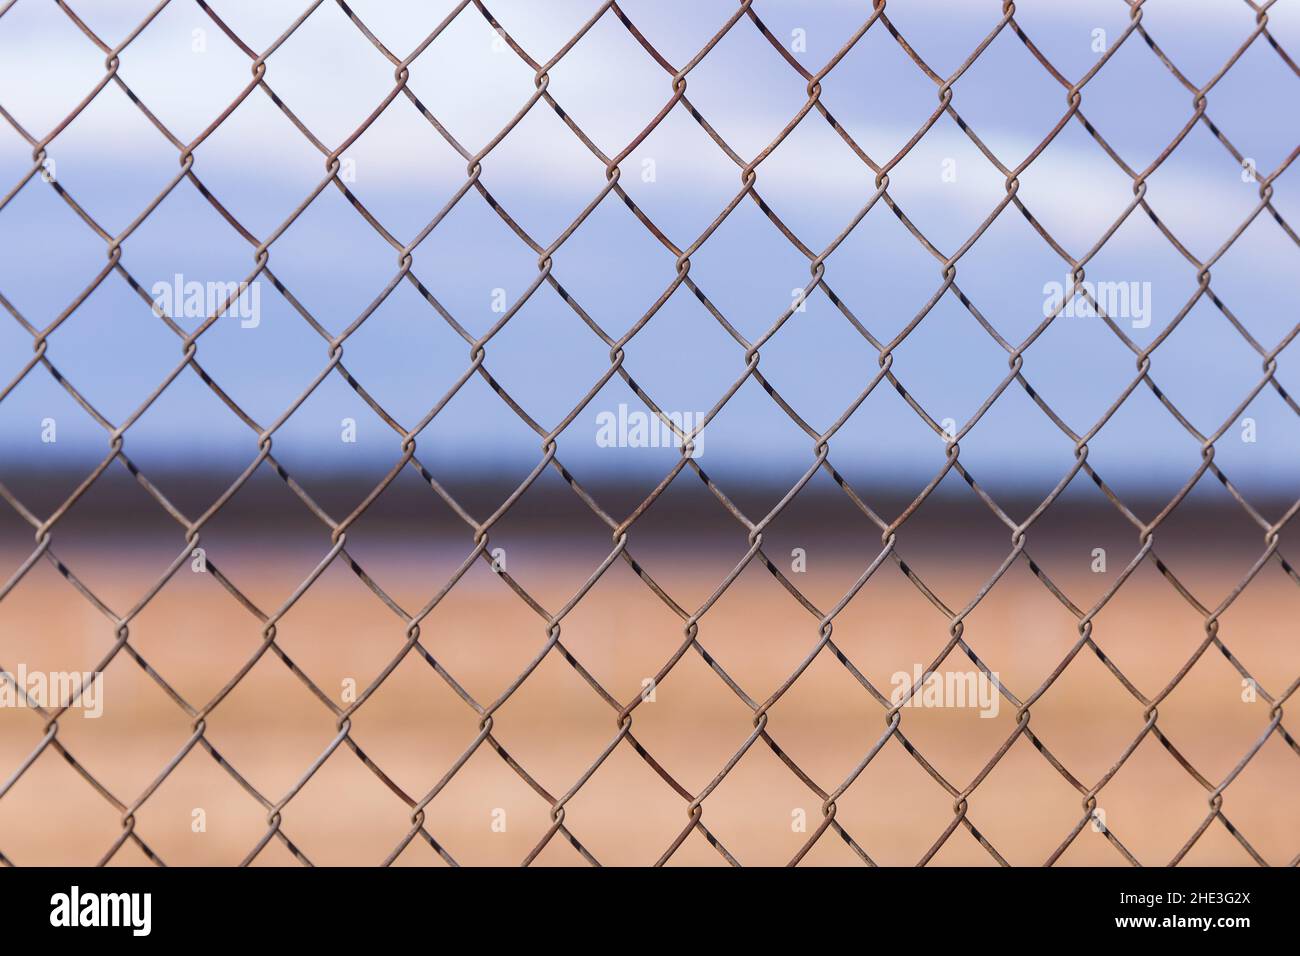 Chicken wire pattern closeup with brown background Stock Photo